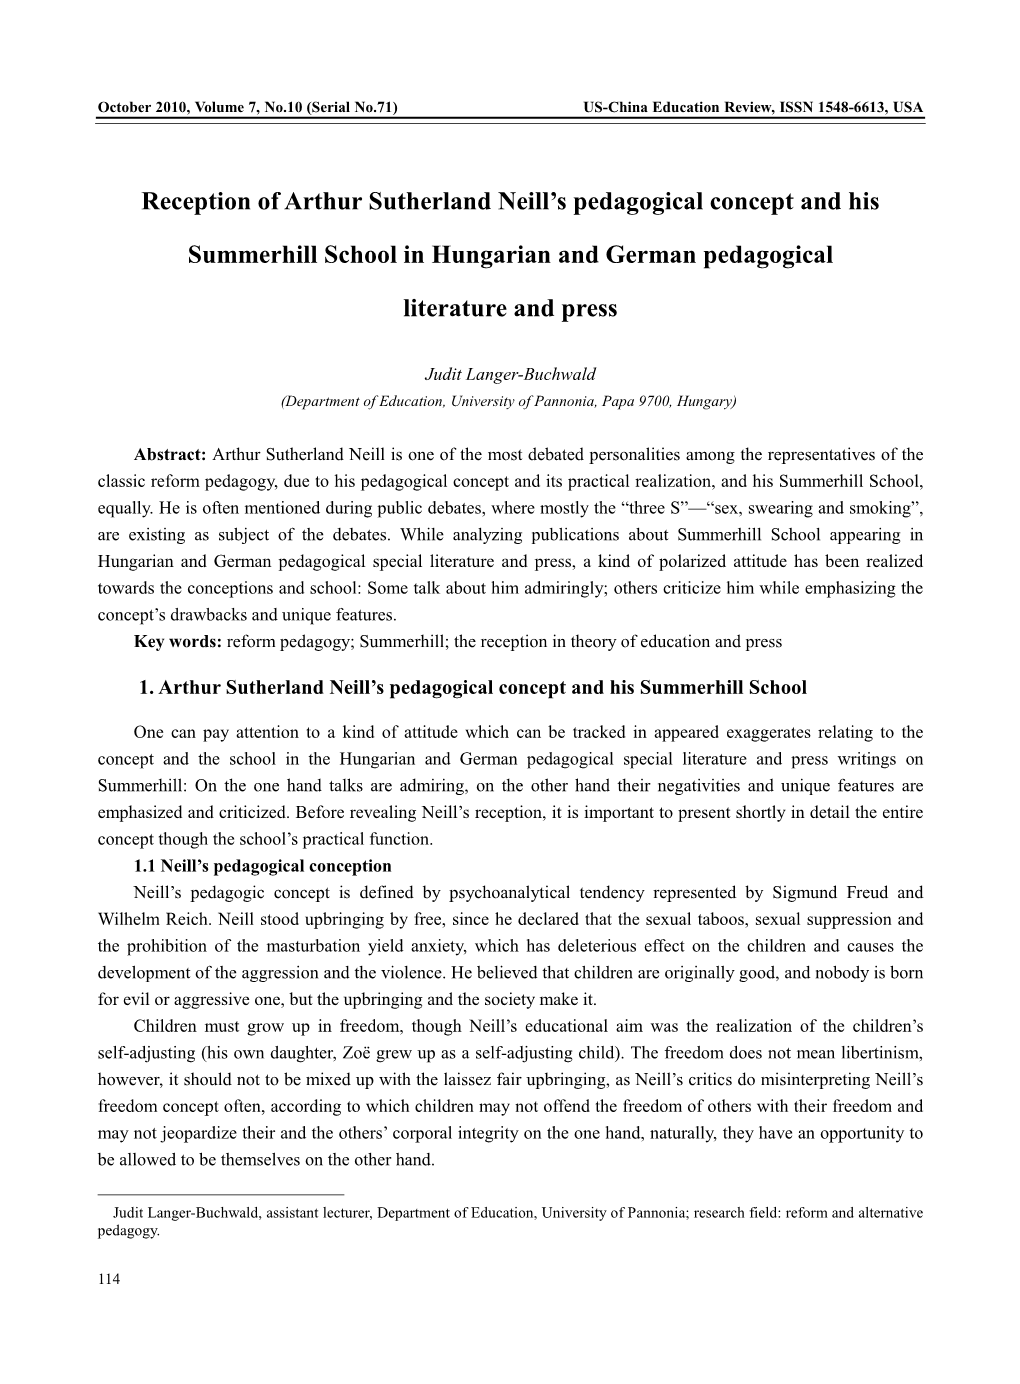 Reception of Arthur Sutherland Neill's Pedagogical Concept and His